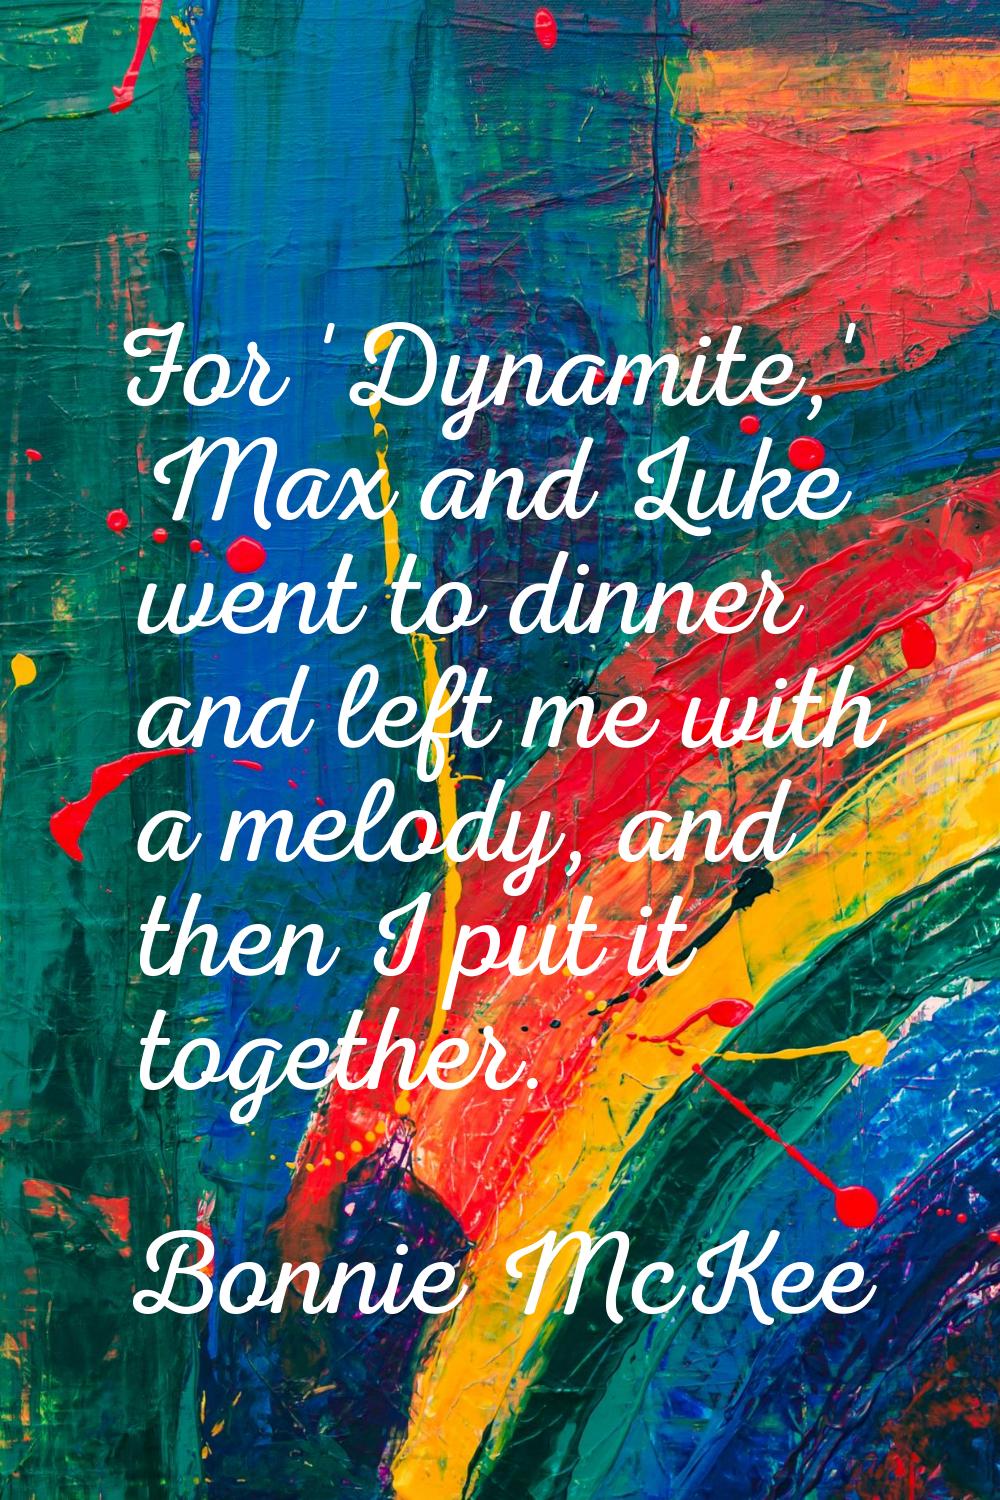 For 'Dynamite,' Max and Luke went to dinner and left me with a melody, and then I put it together.